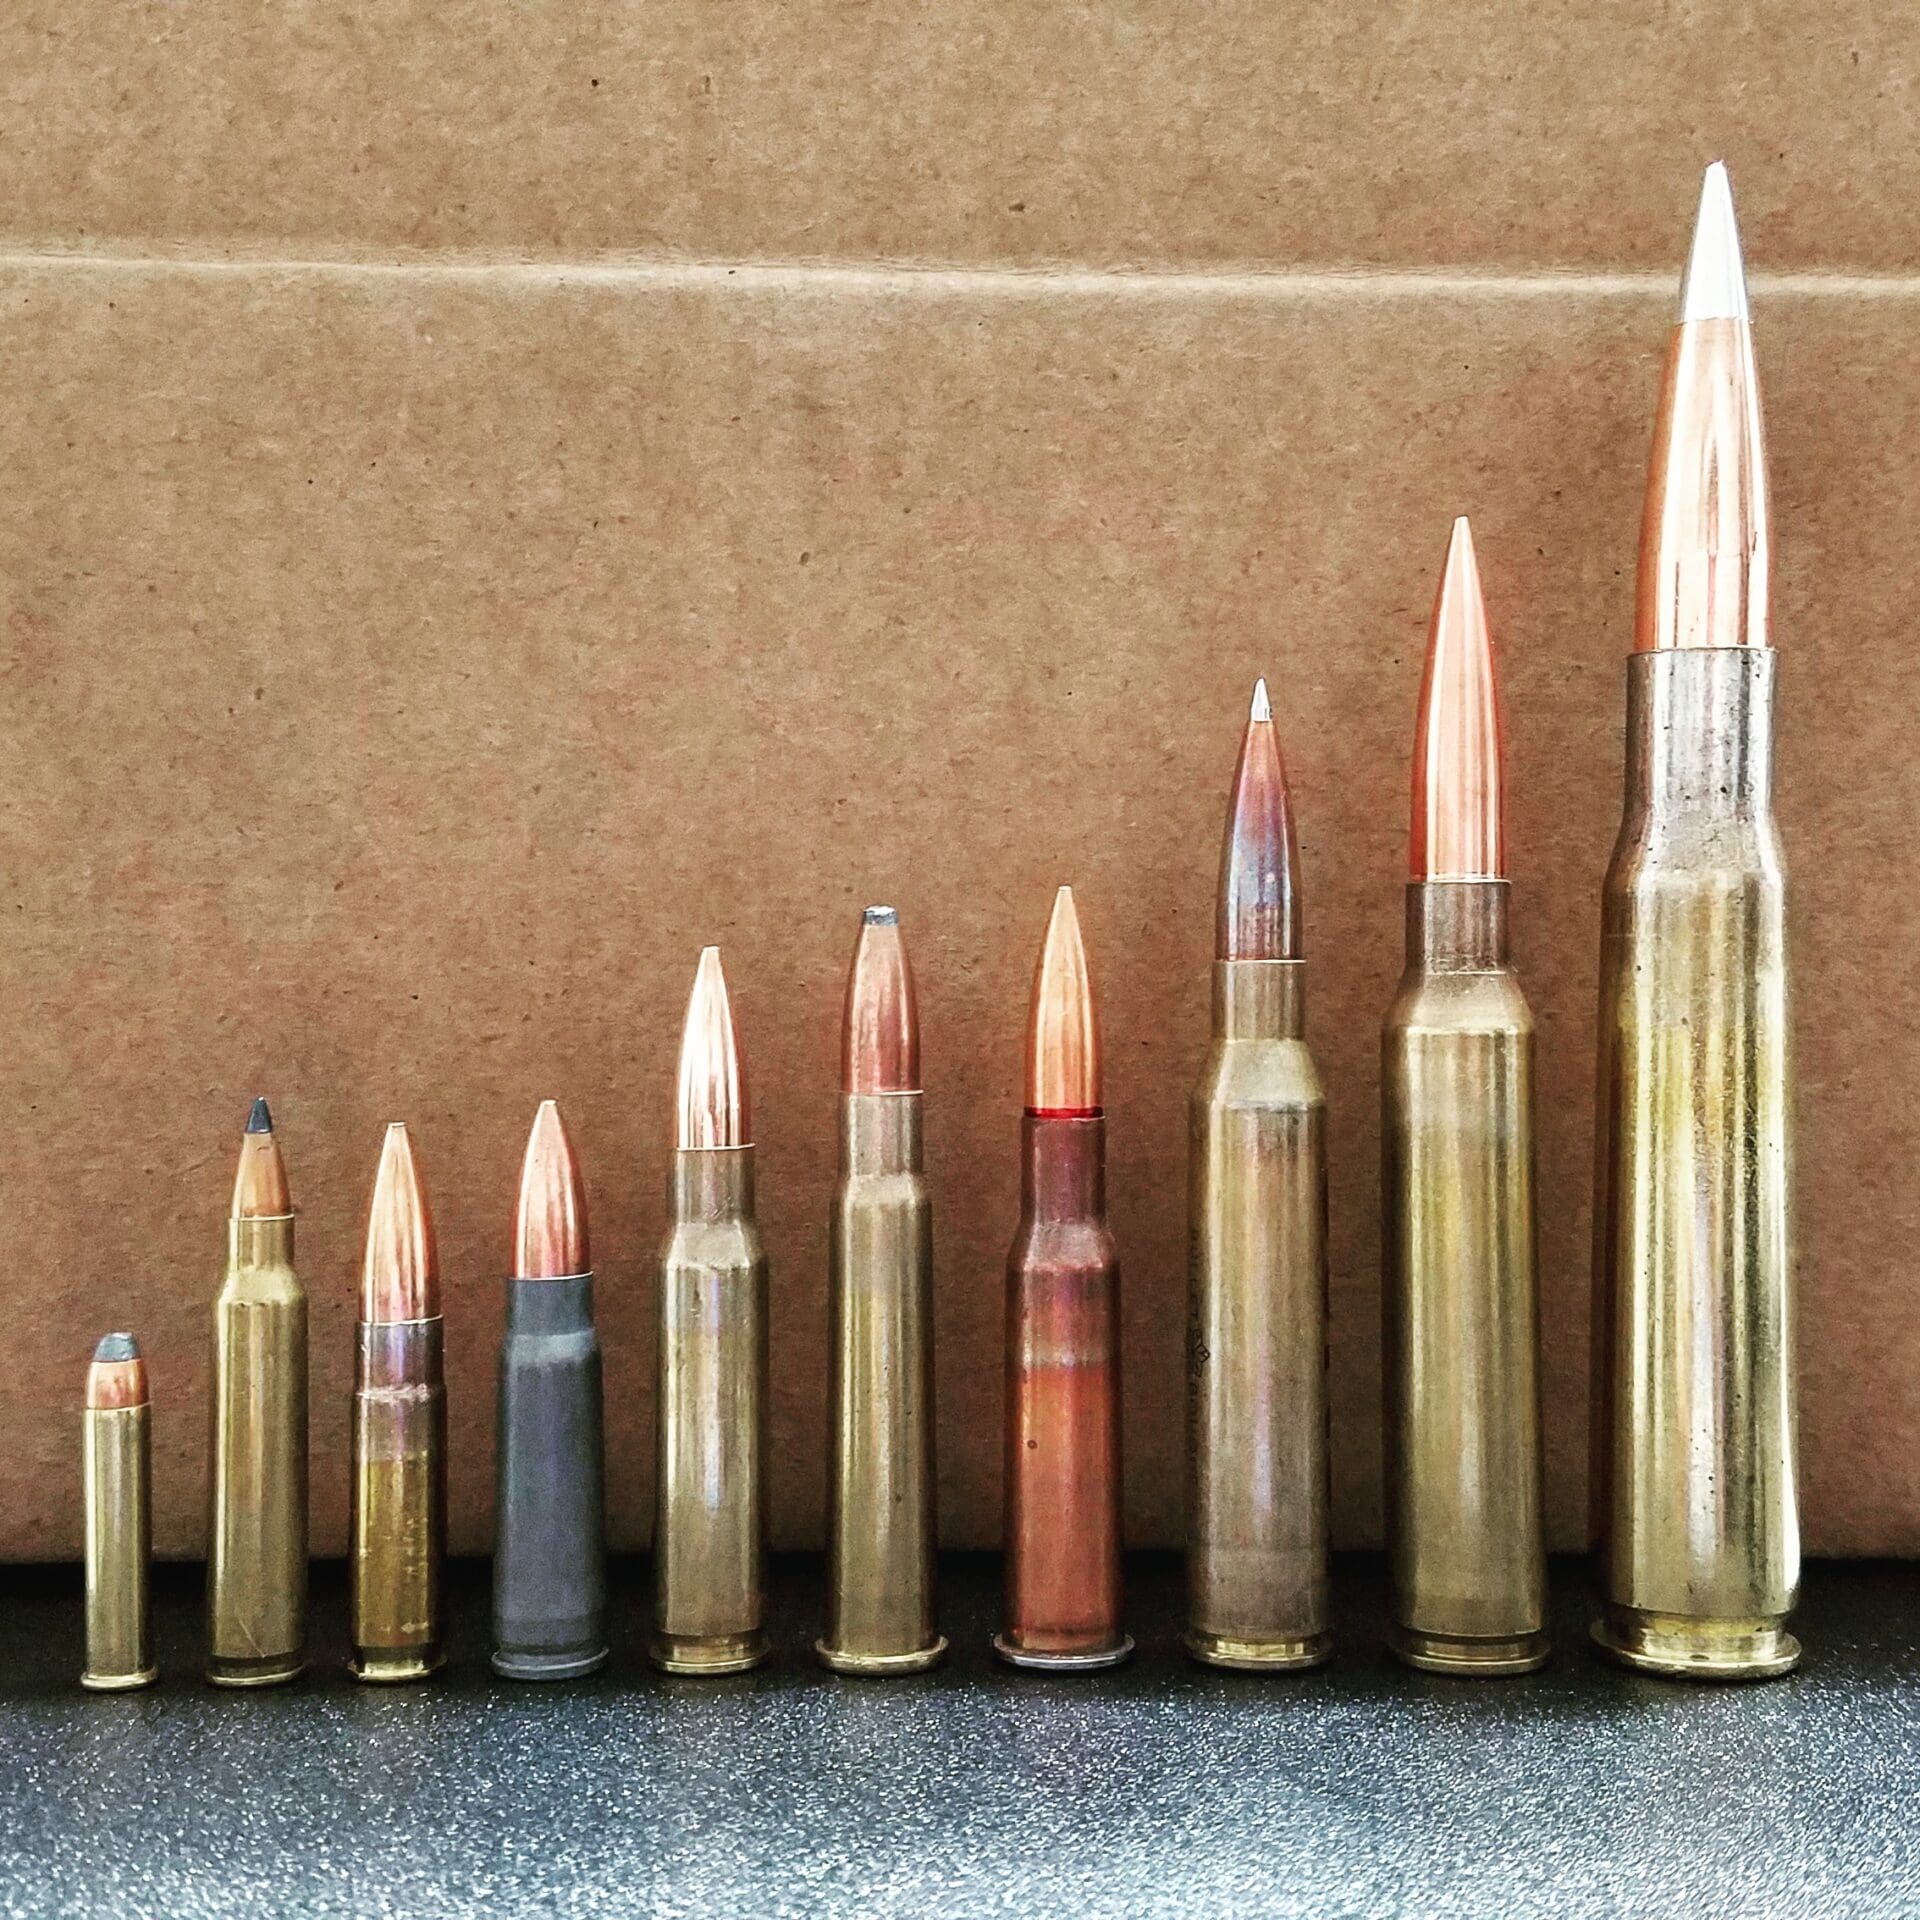 Awesome 338 Lapua Vs 50 Bmg through the thousand photographs on the interne...